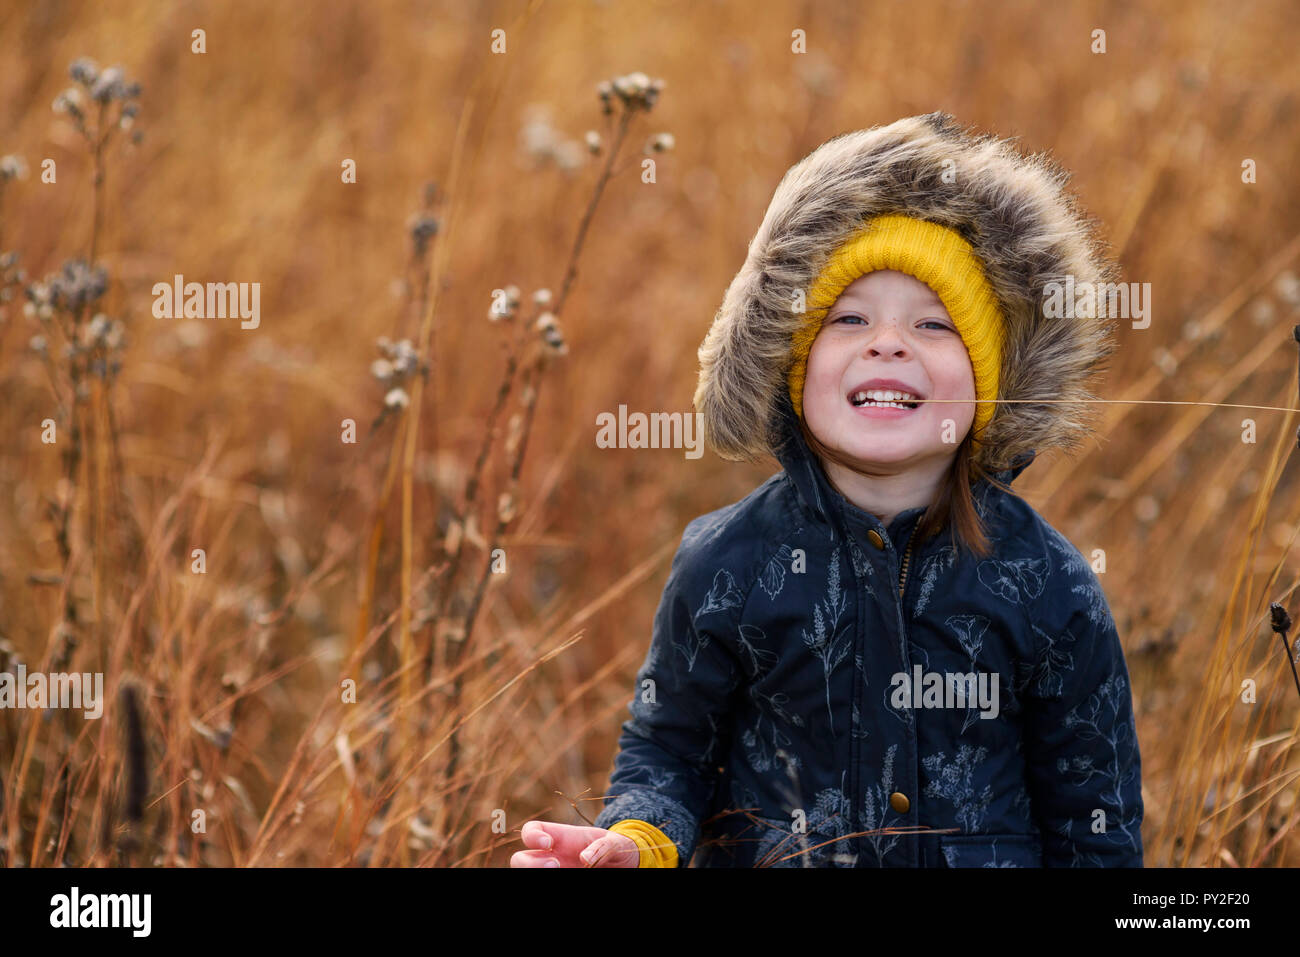 Portrait of a smiling girl in a field, United States Stock Photo